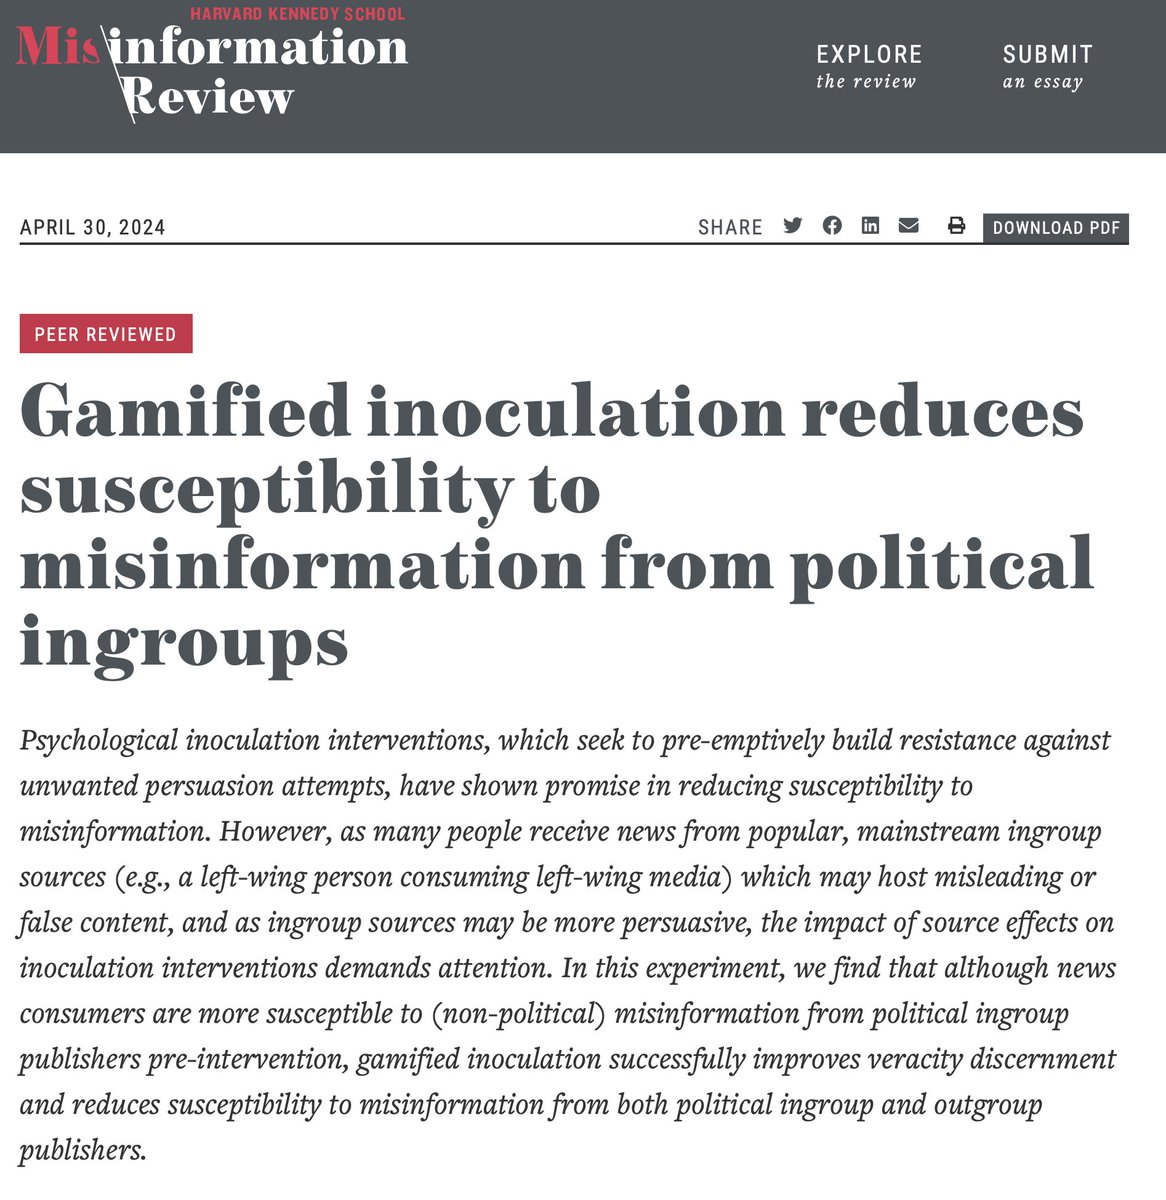 📢Excited to share our new paper in Harvard Kennedy School Misinformation Review with @roozenbot & @Sander_vdLinden📢 We explore the effectiveness of gamified #inoculation in reducing susceptibility to #misinformation from politically congenial outlets🎮 misinforeview.hks.harvard.edu/article/gamifi…